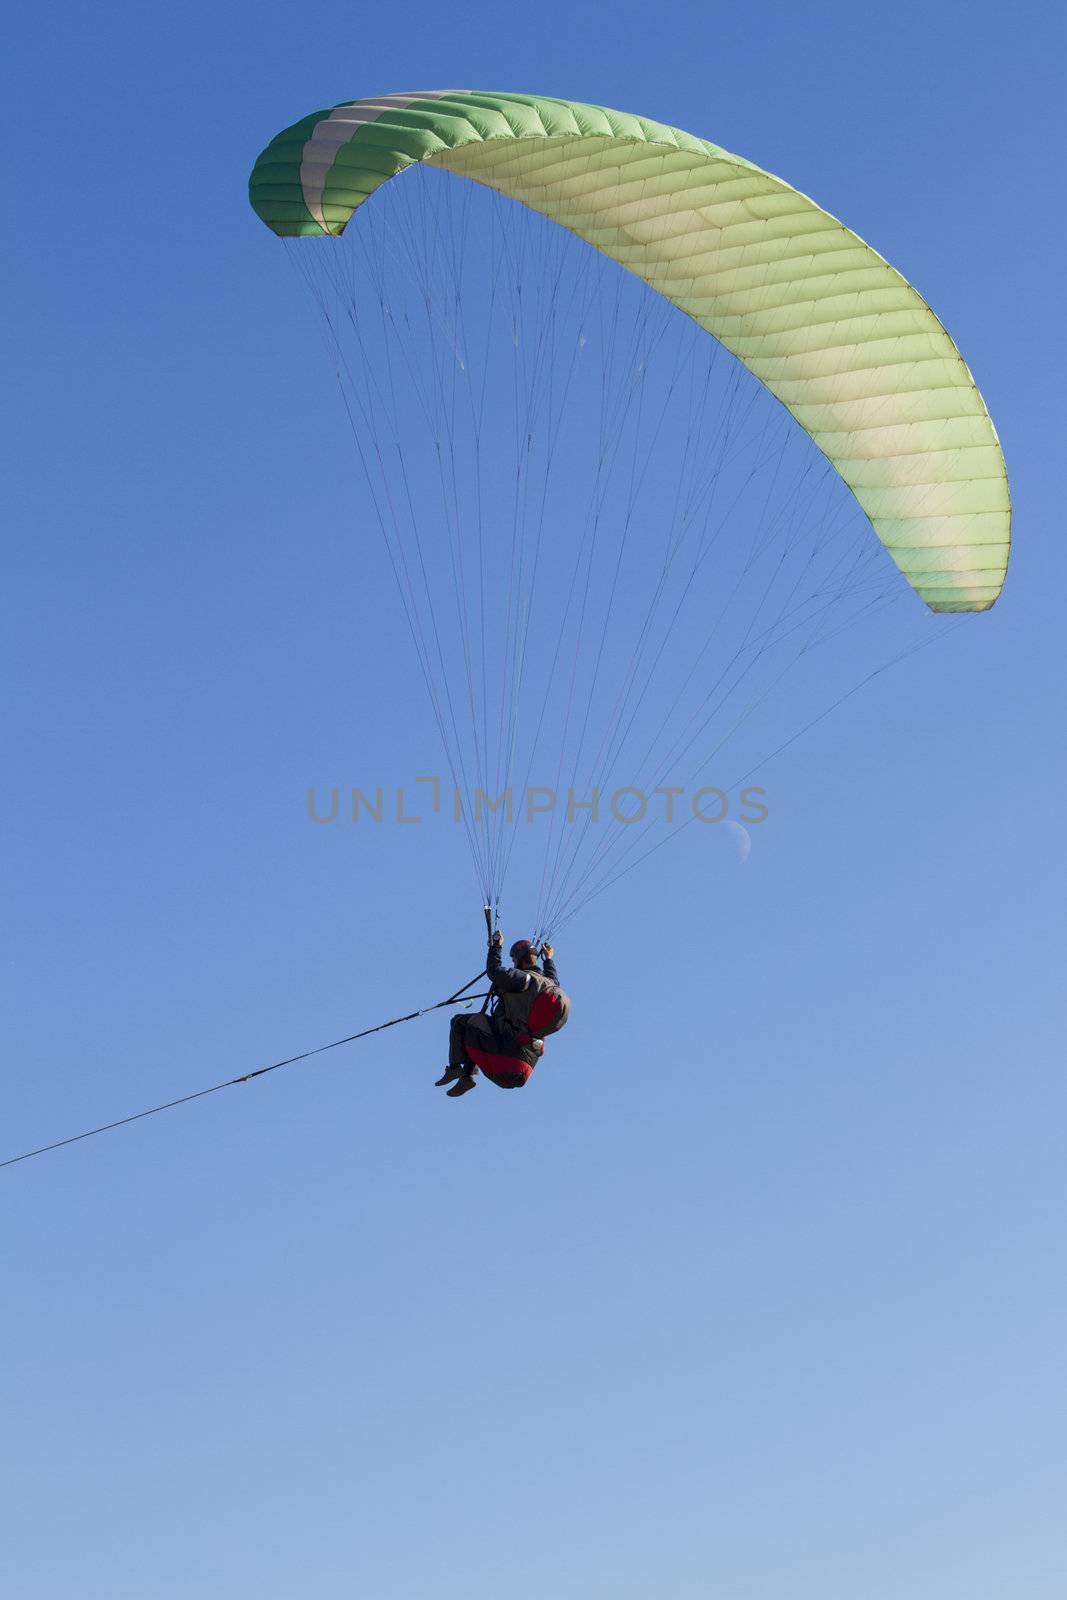 A paraglider takes to the sky. Shot from below against a blue sky.